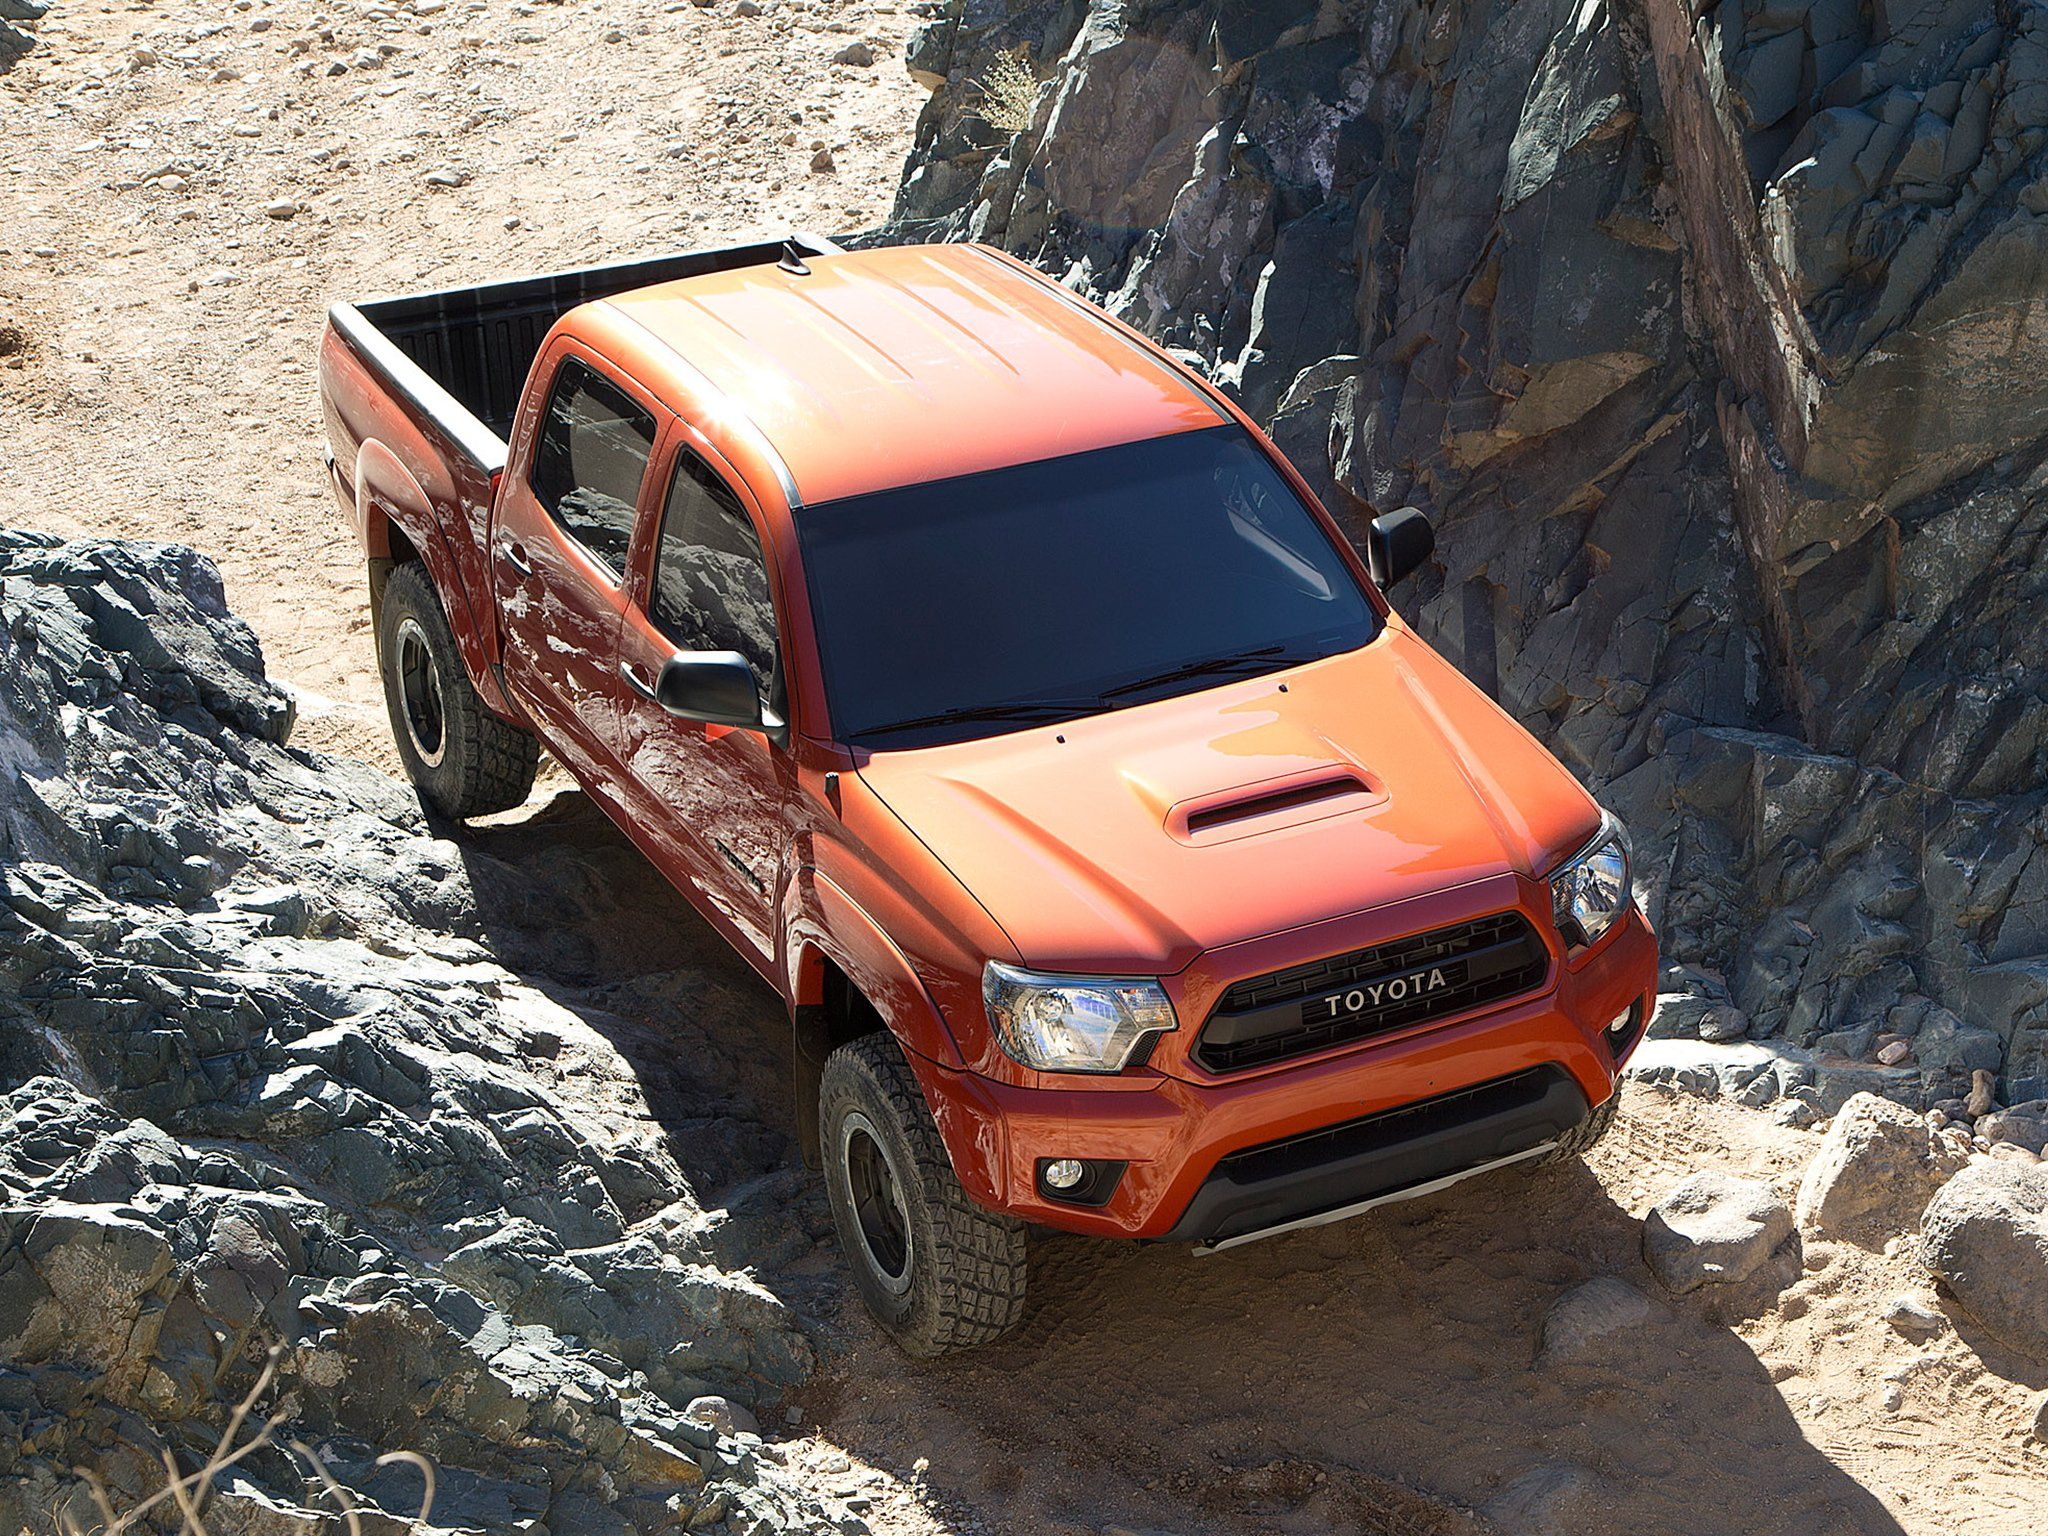 Toyota Truck Wallpapers - image